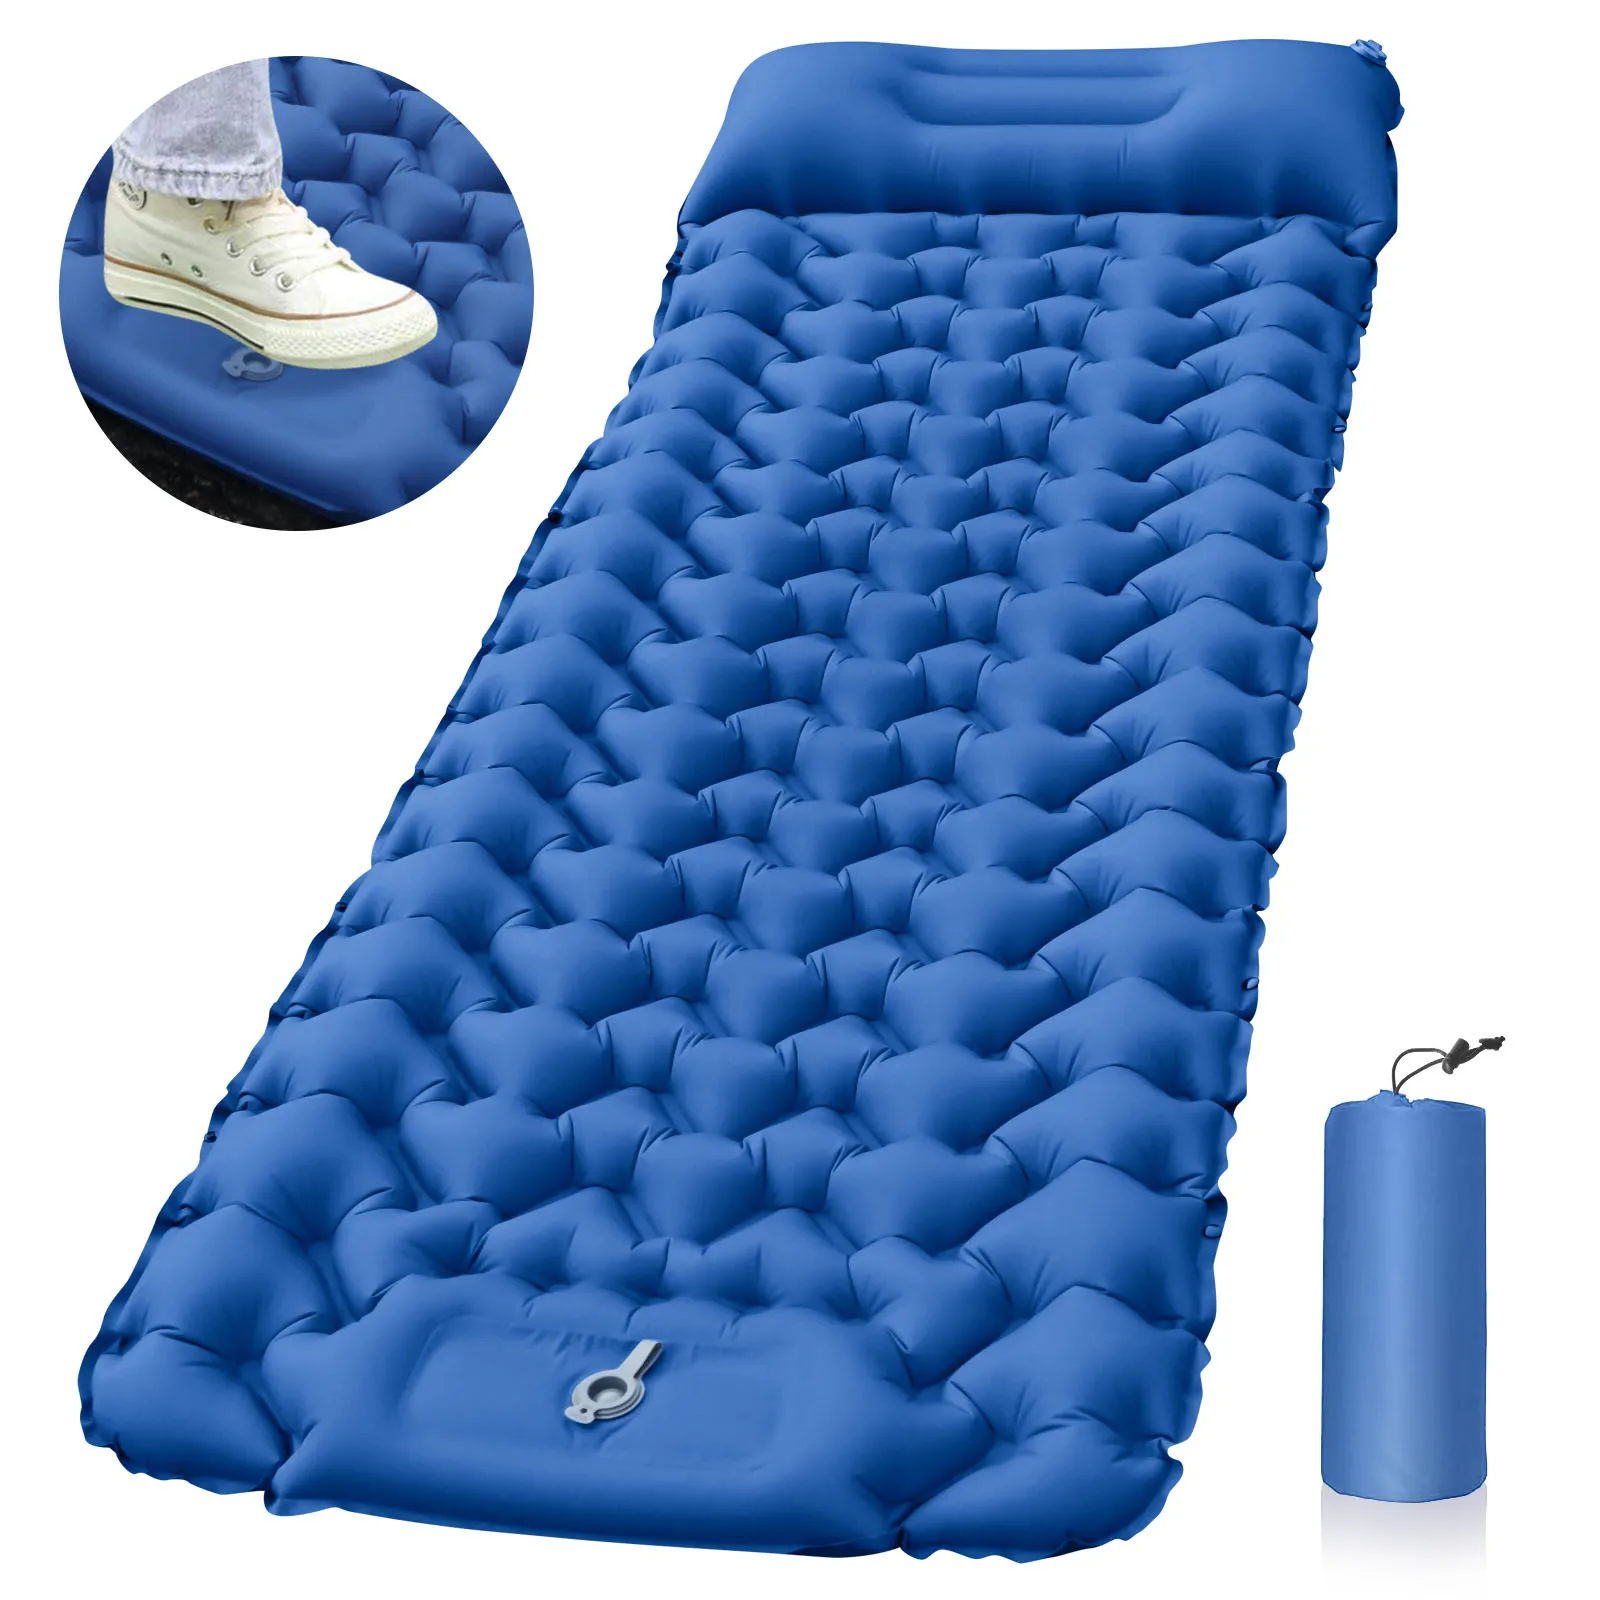 

Camping Inflatable Mattress Ultralight Outdoor Sleeping Pad with Pillow Built-in Pump Air Mat for Backpacking Hiking